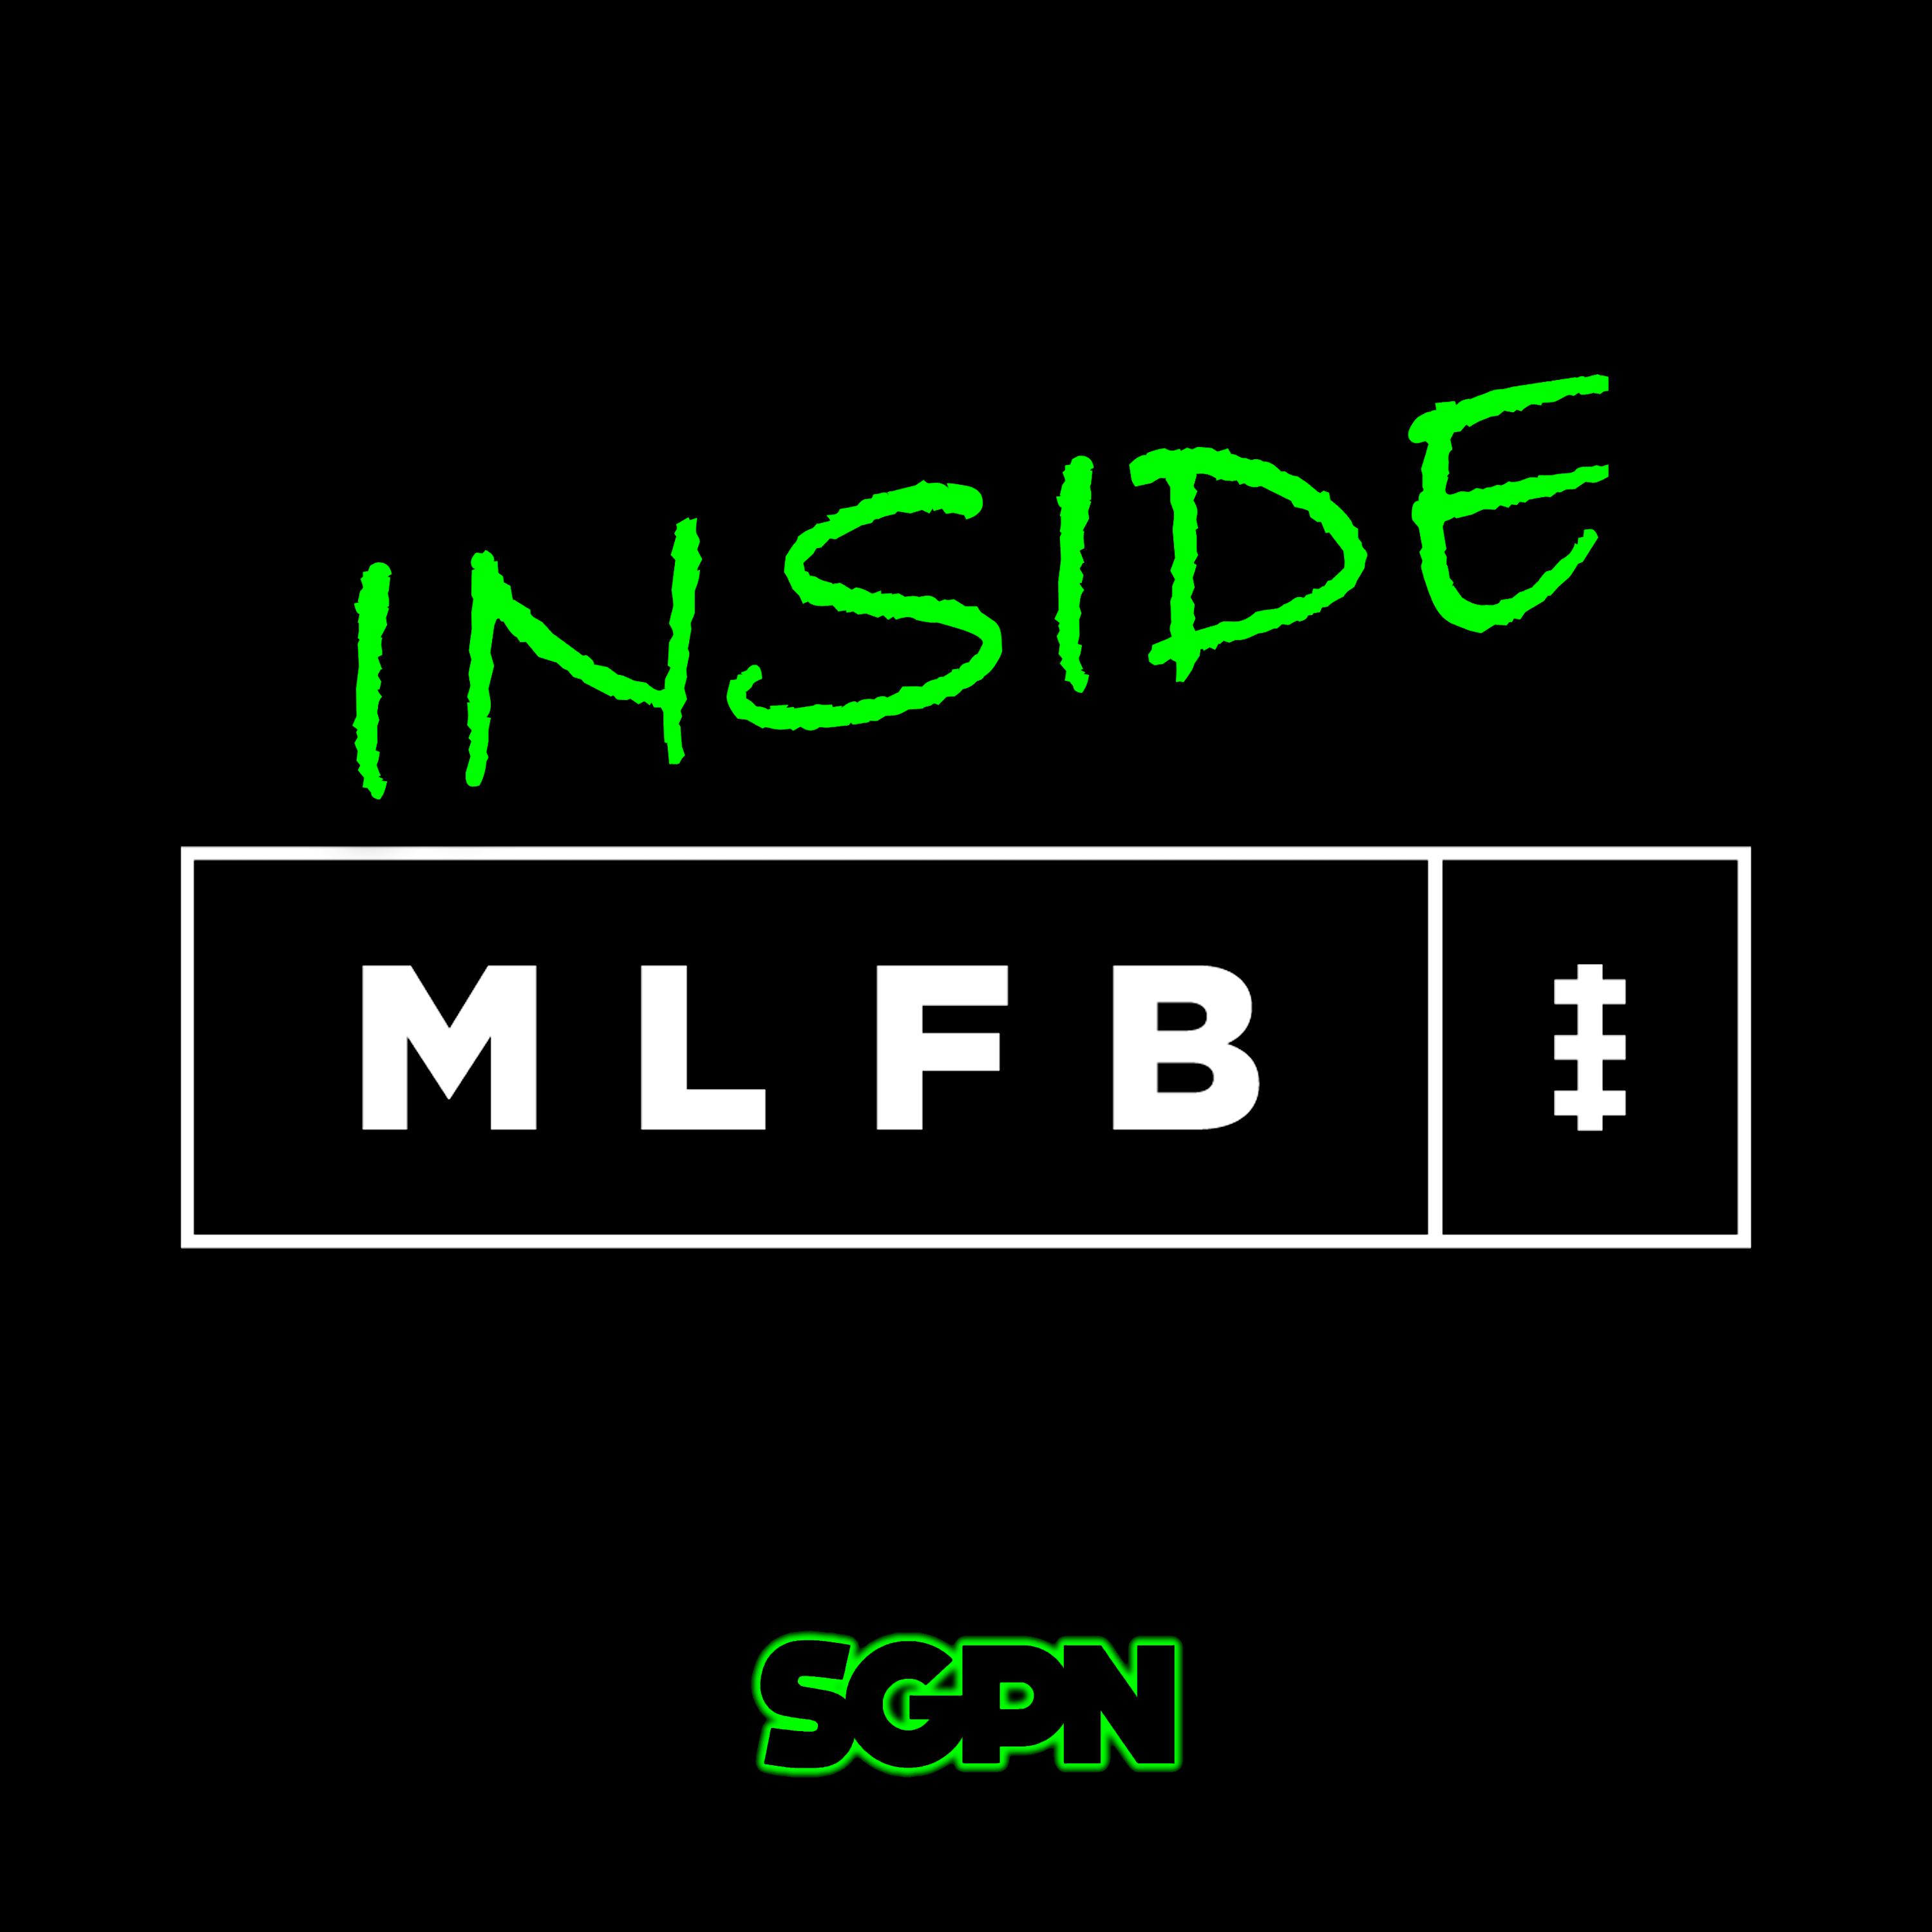 Interview with Steve Videtich - COO of Major League Football (Ep. 14)